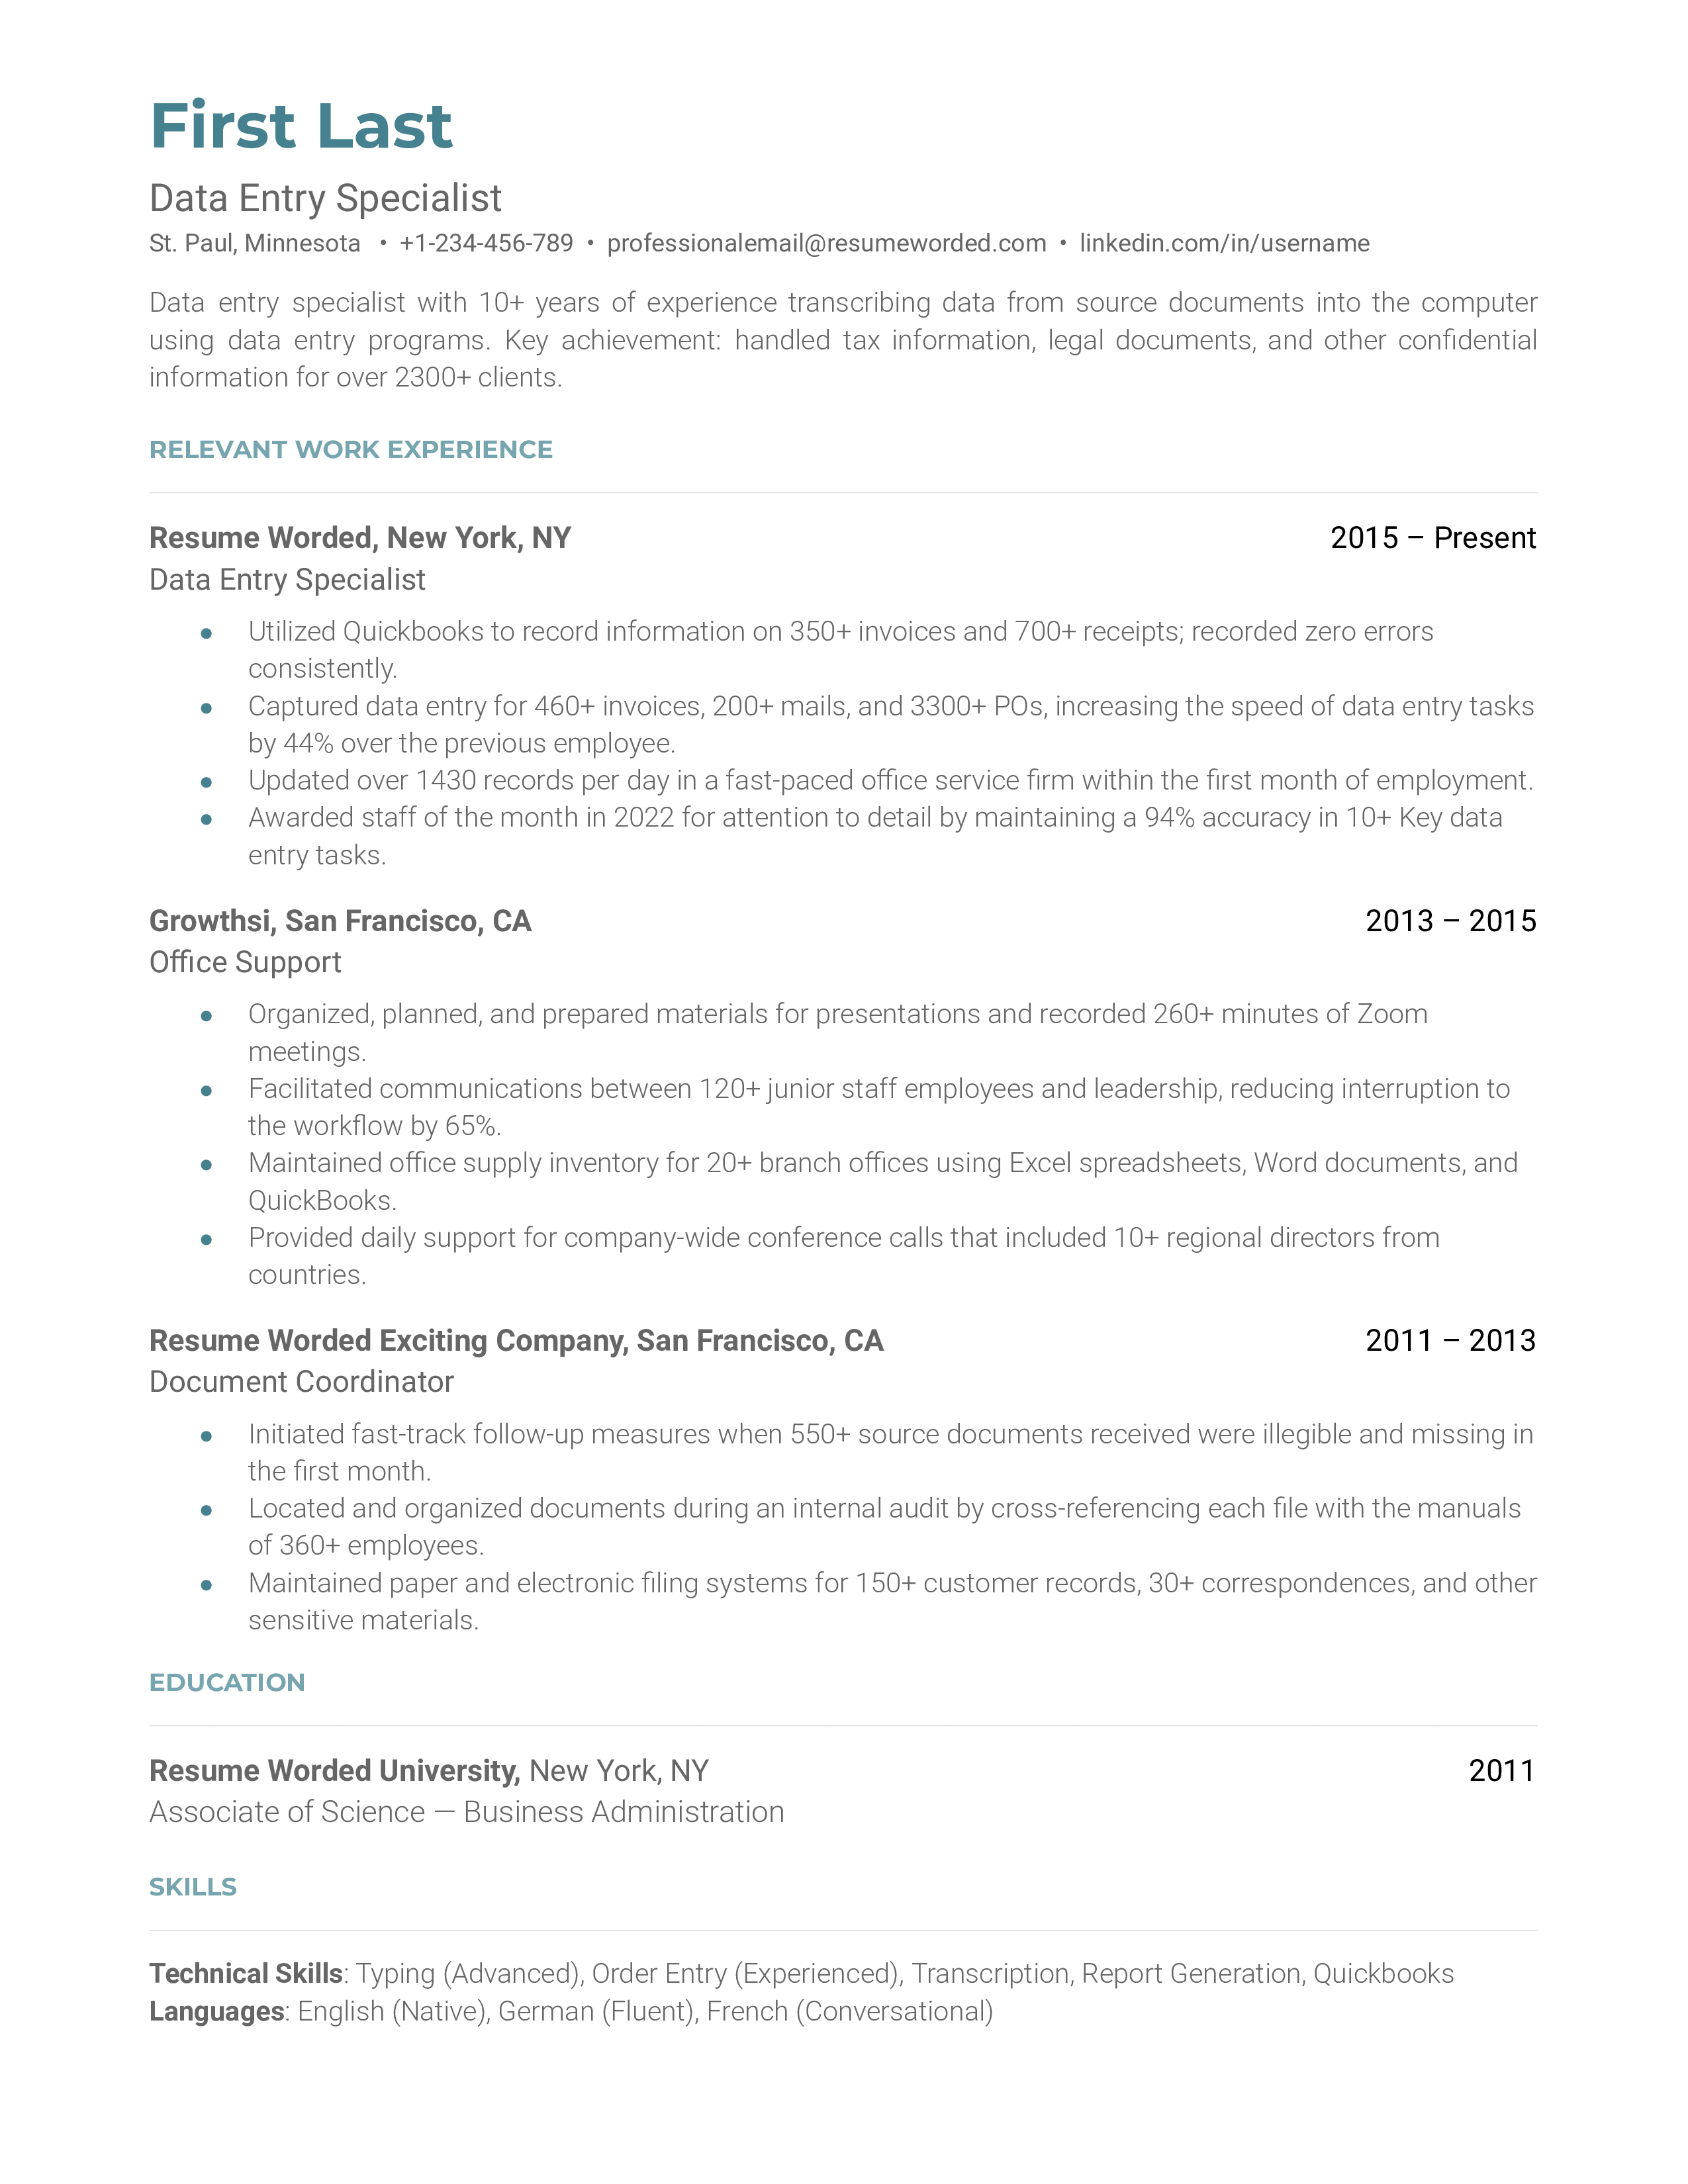 Data Entry Specialist resume with emphasis on software proficiency and typing speed.